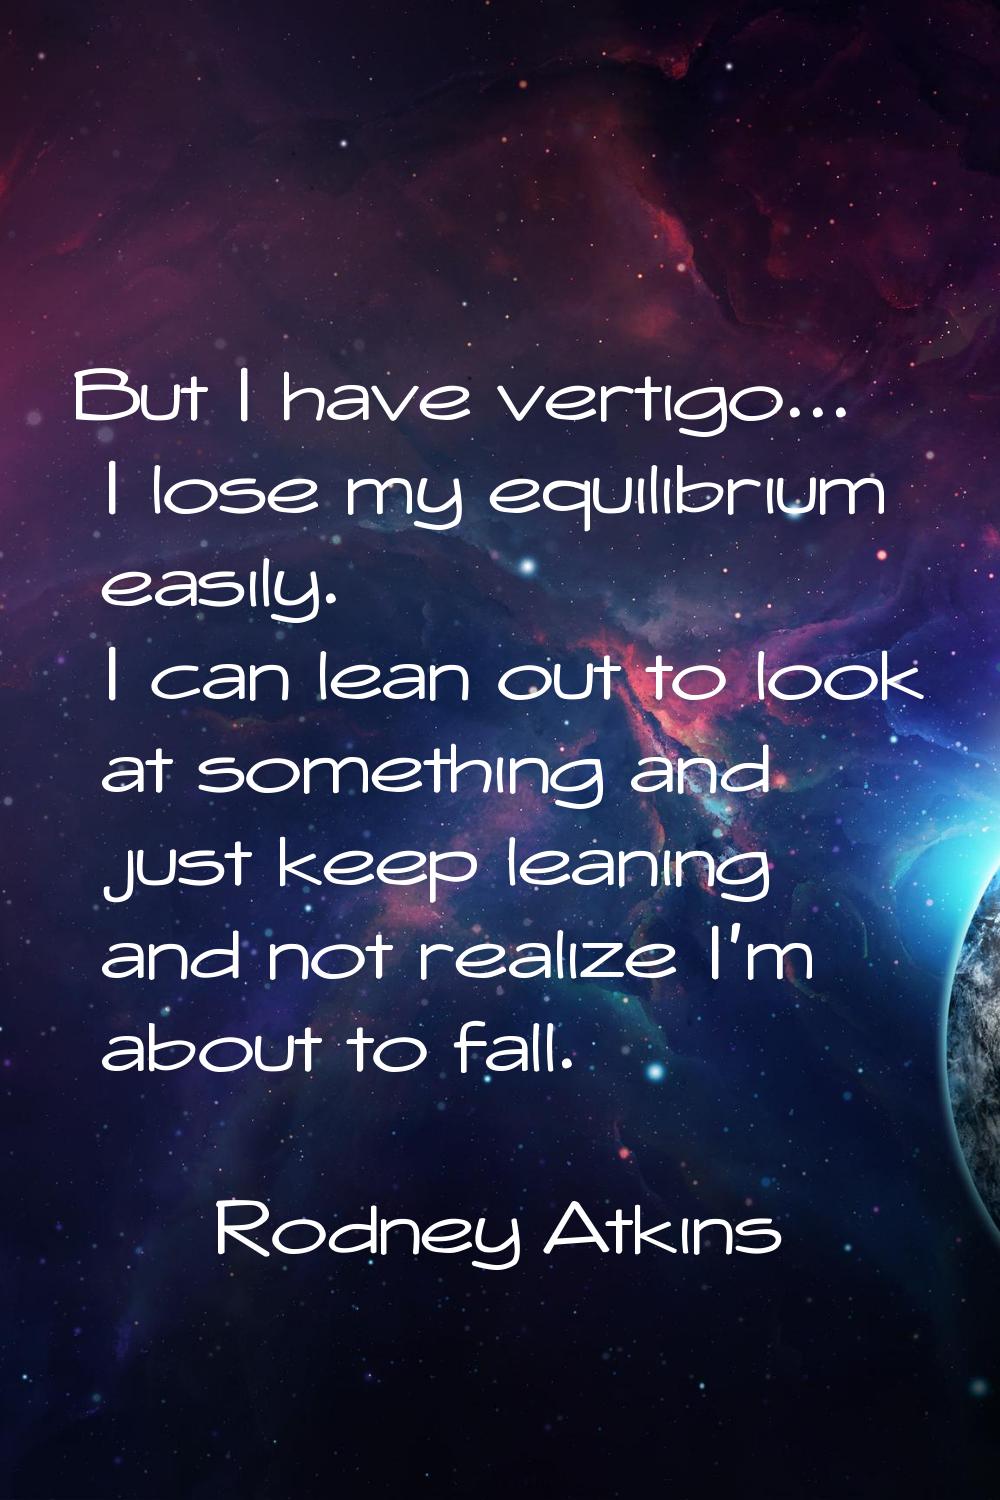 But I have vertigo... I lose my equilibrium easily. I can lean out to look at something and just ke